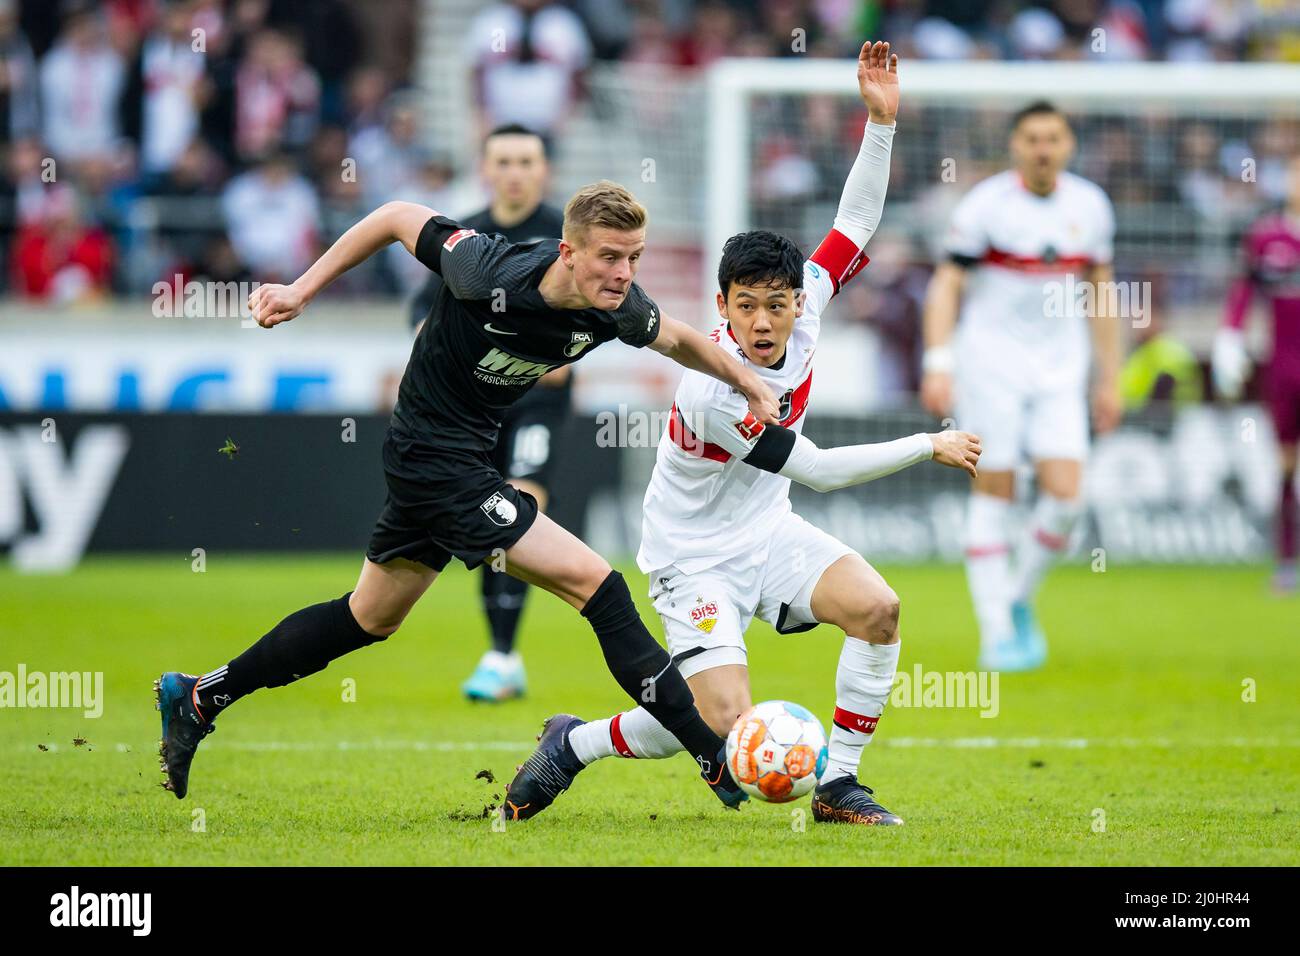 Stuttgart, Germany. 19th Mar, 2022. Soccer: Bundesliga, VfB Stuttgart - FC Augsburg, Matchday 27, Mercedes-Benz Arena. Augsburg's Frederik Winther (l) holds Stuttgart's Wataru Endo (r). Credit: Tom Weller/dpa - IMPORTANT NOTE: In accordance with the requirements of the DFL Deutsche Fußball Liga and the DFB Deutscher Fußball-Bund, it is prohibited to use or have used photographs taken in the stadium and/or of the match in the form of sequence pictures and/or video-like photo series./dpa/Alamy Live News Stock Photo